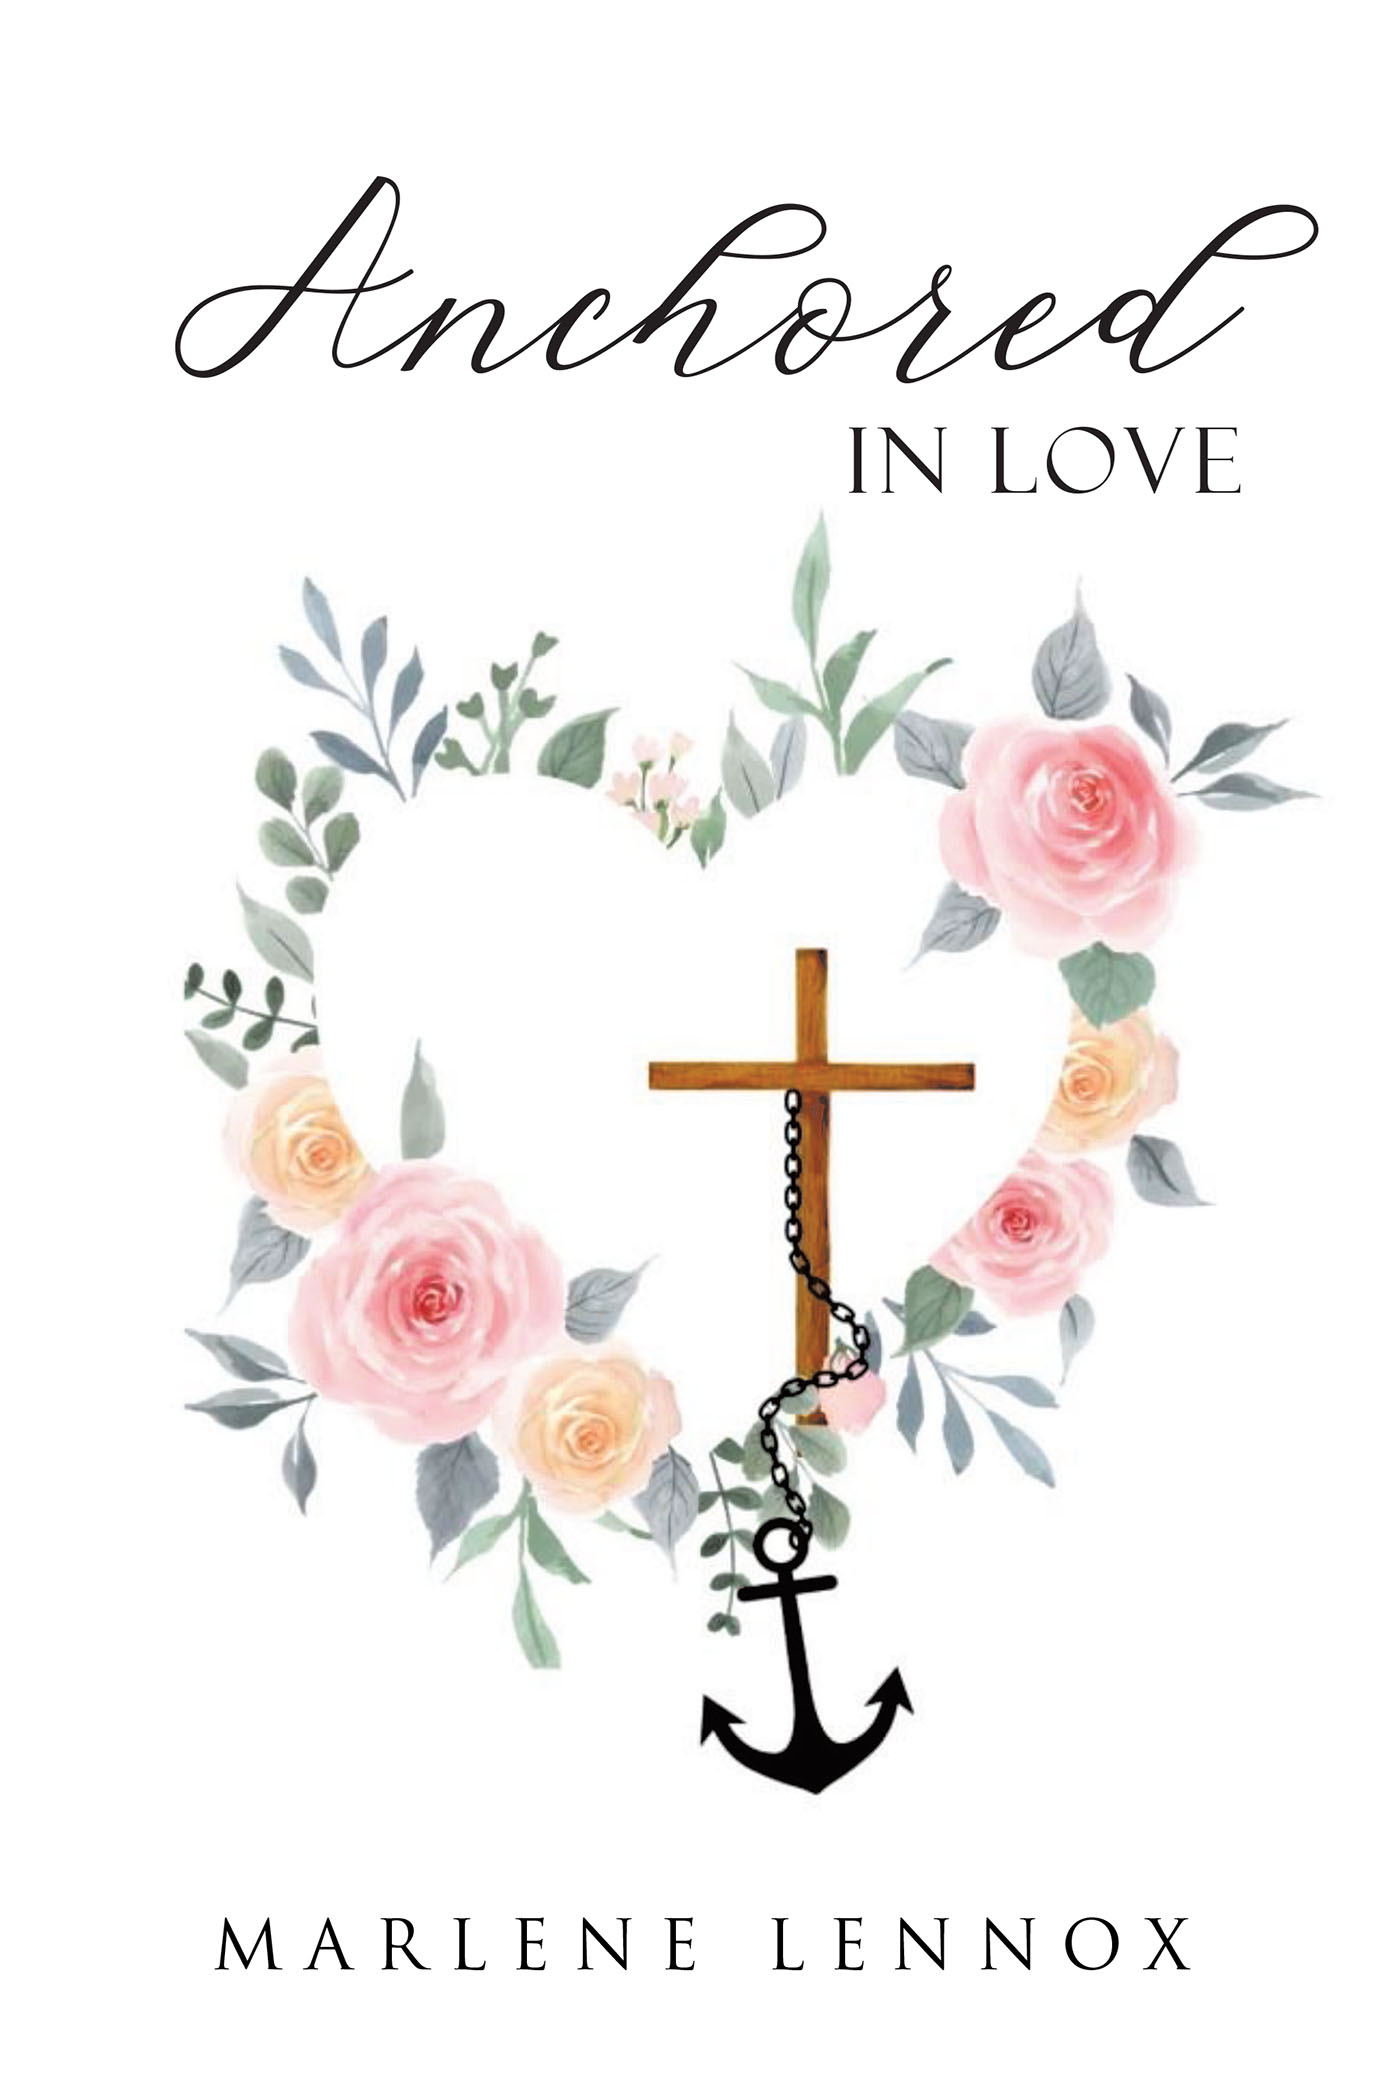 Marlene Lennox’s Newly Released "Anchored in Love" is an Enjoyable Collection of Heartfelt Poetry Inspired by Life, Love, and Faith